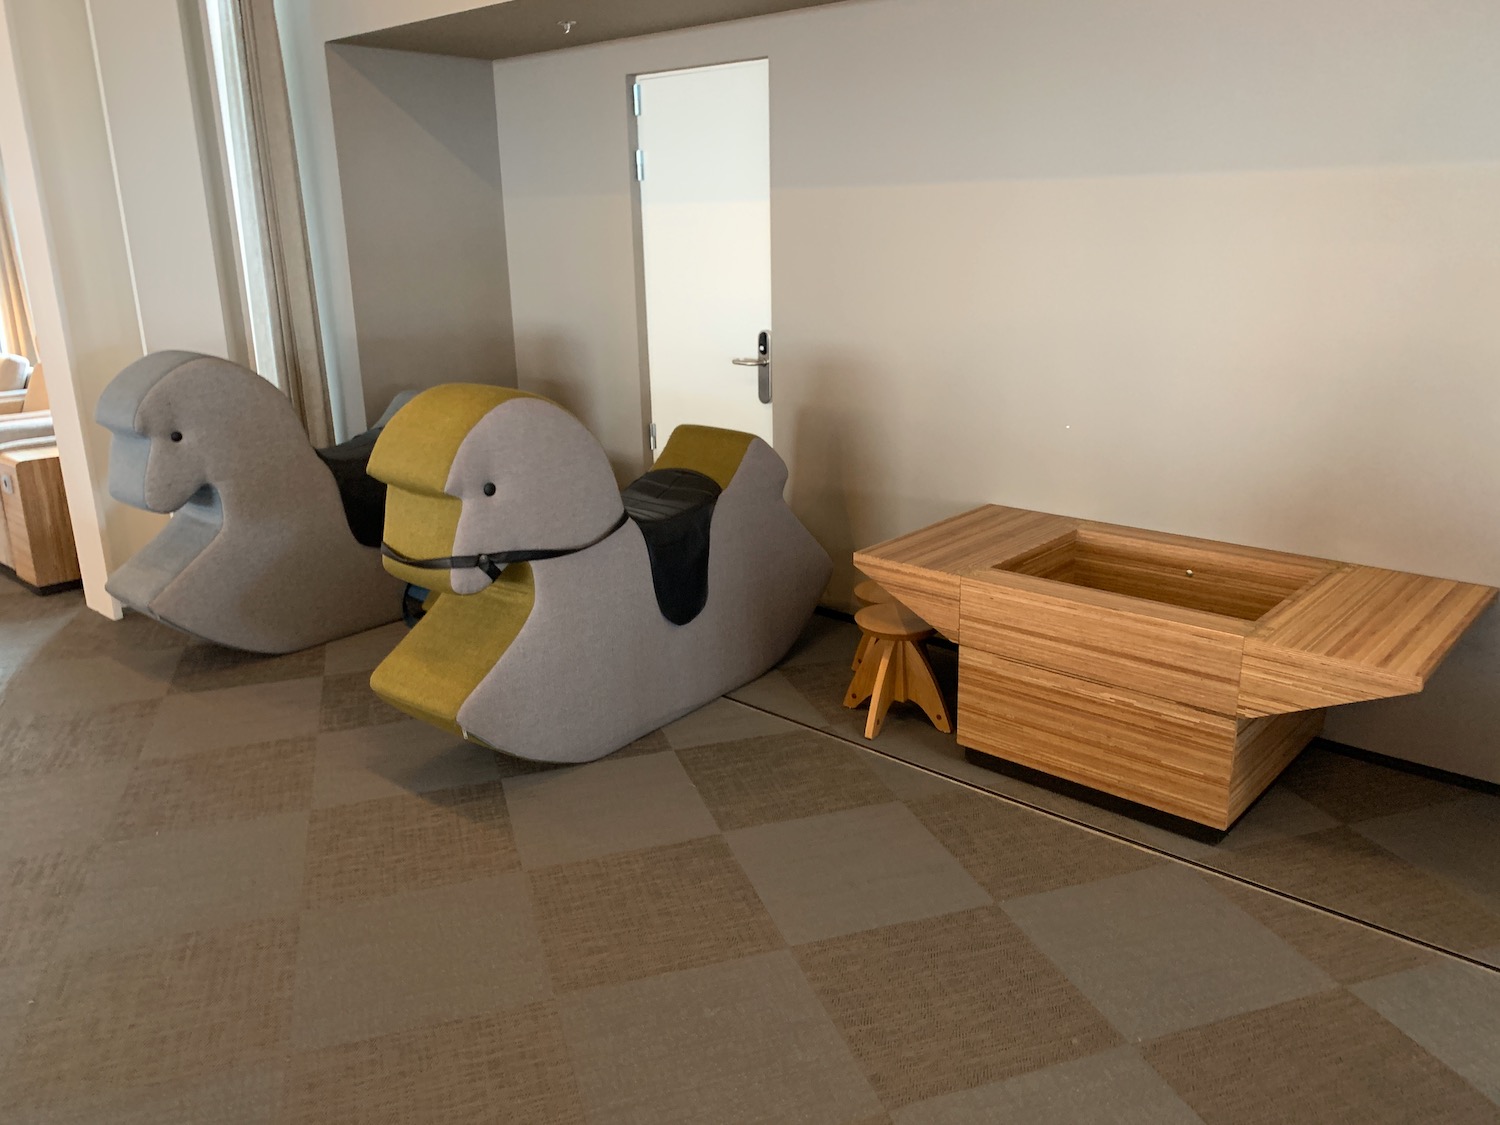 a group of rocking horses in a room